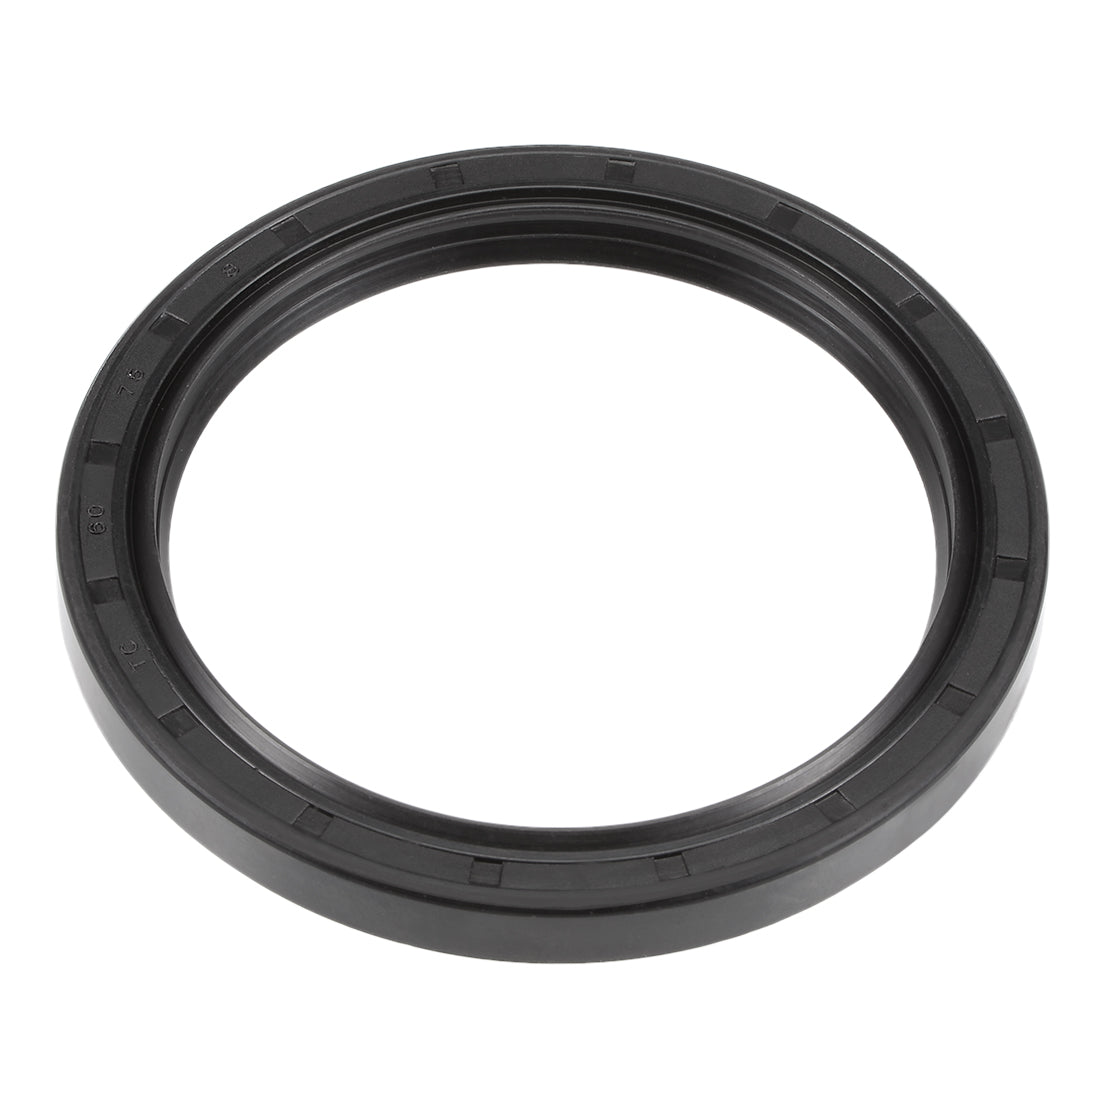 uxcell Uxcell Oil Seal, TC 60mm x 75mm x 8mm, Nitrile Rubber Cover Double Lip